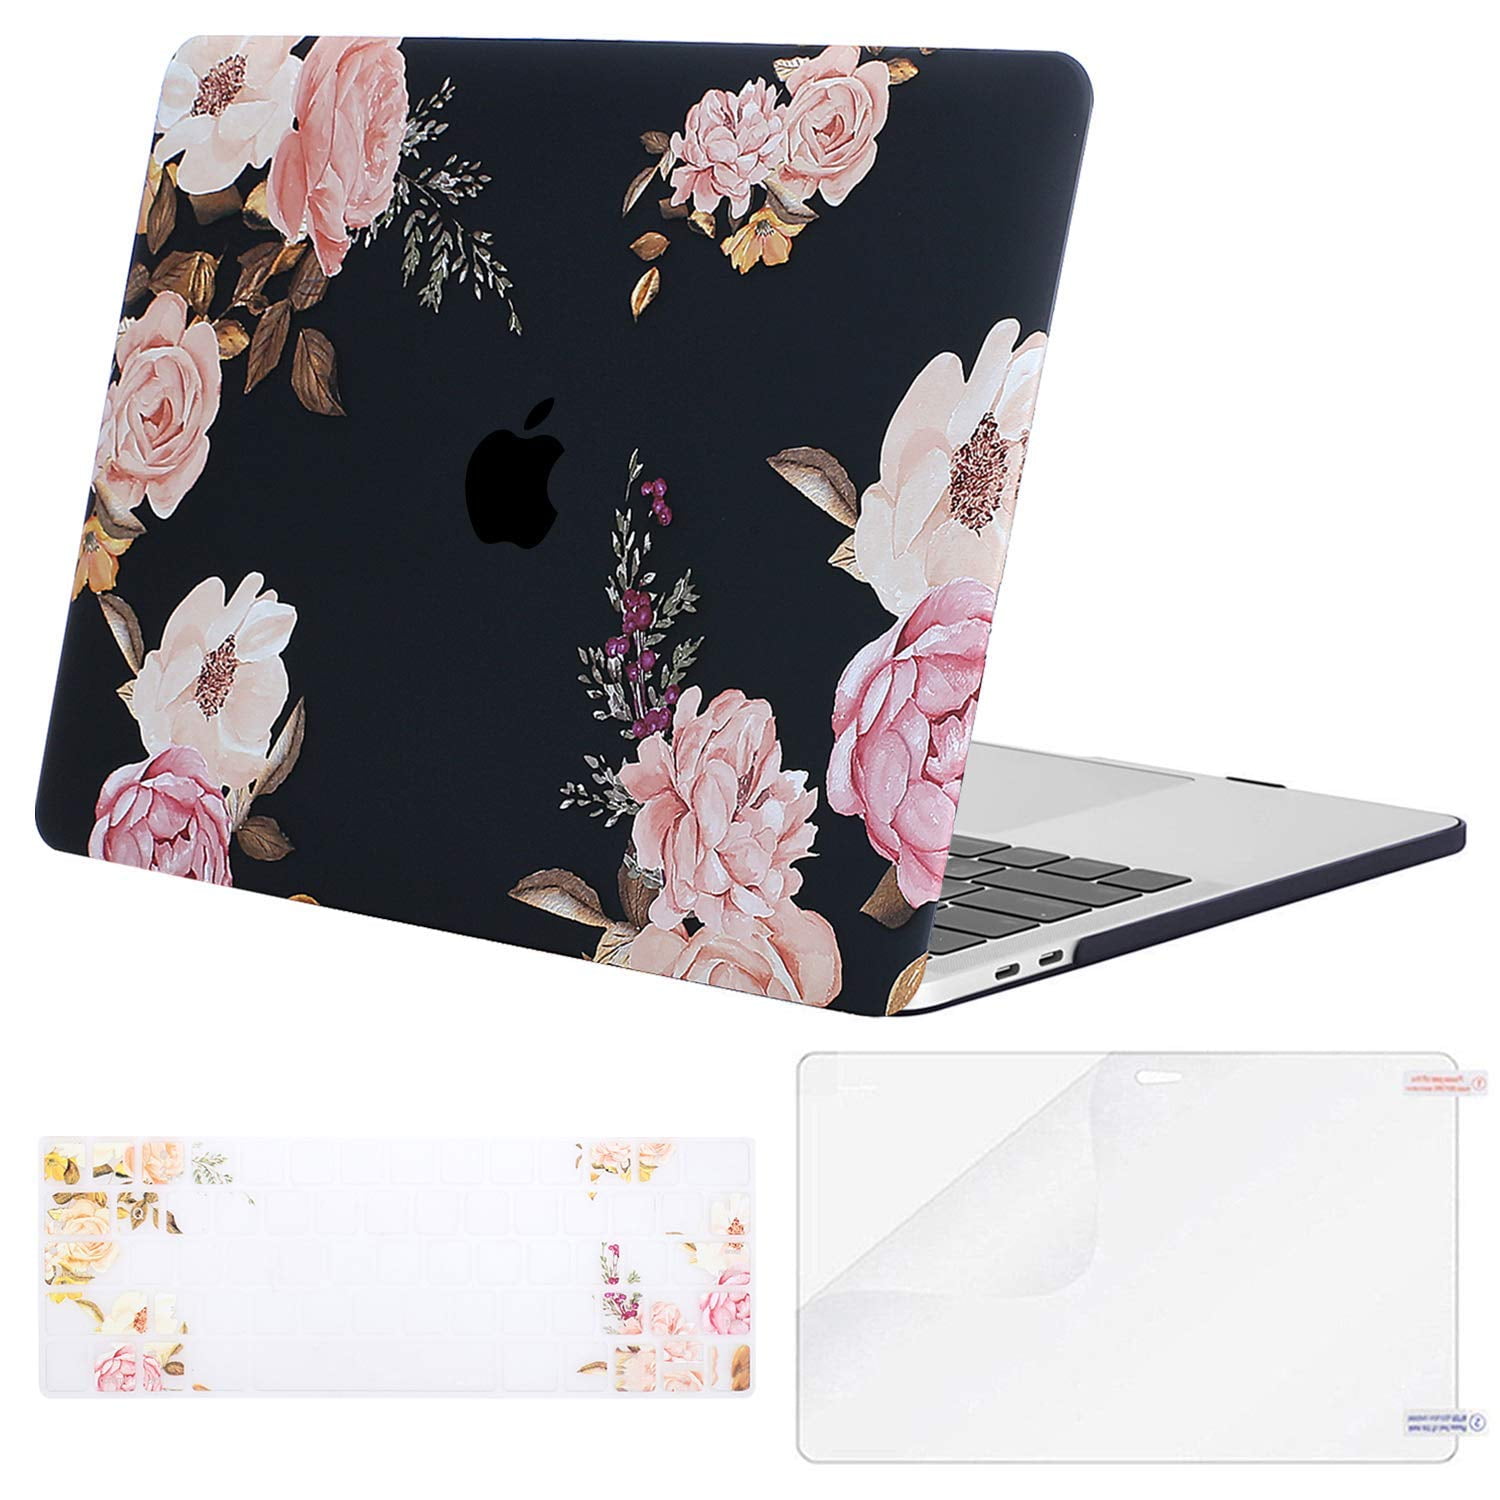 MOSISO MacBook Pro 13 Case 2018 2017 2016 Release A1989/A1706/A1708 w/ & w/o Touch Bar,Plastic Pattern Hard Case & Keyboard Cover & Screen Protector Compatible Newest Mac Pro 13 in,Black Marble 